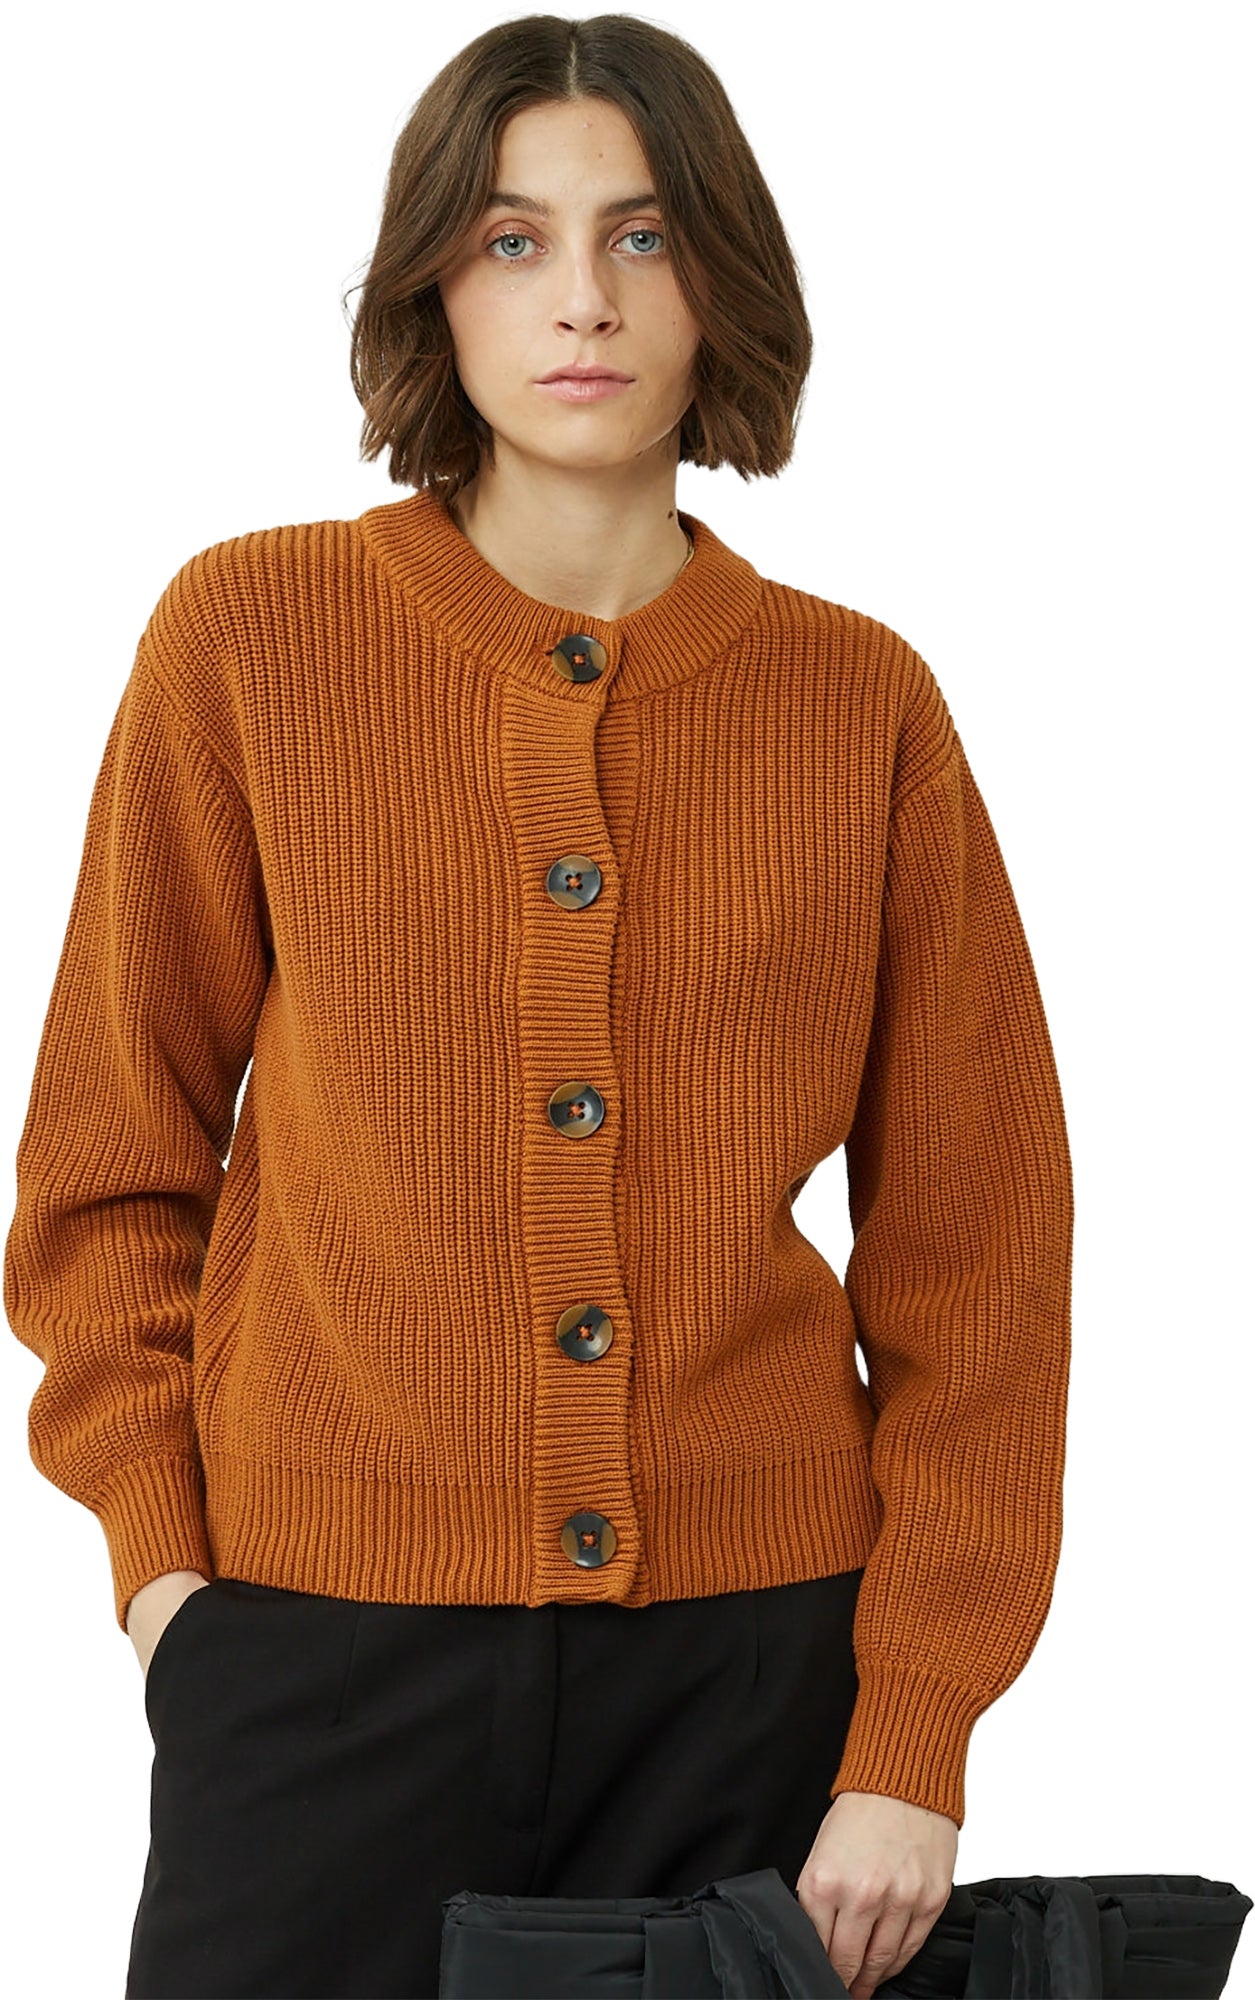 NKOOGH Try Before You Buy Womens Sweaters Misses Cardigan Sweater